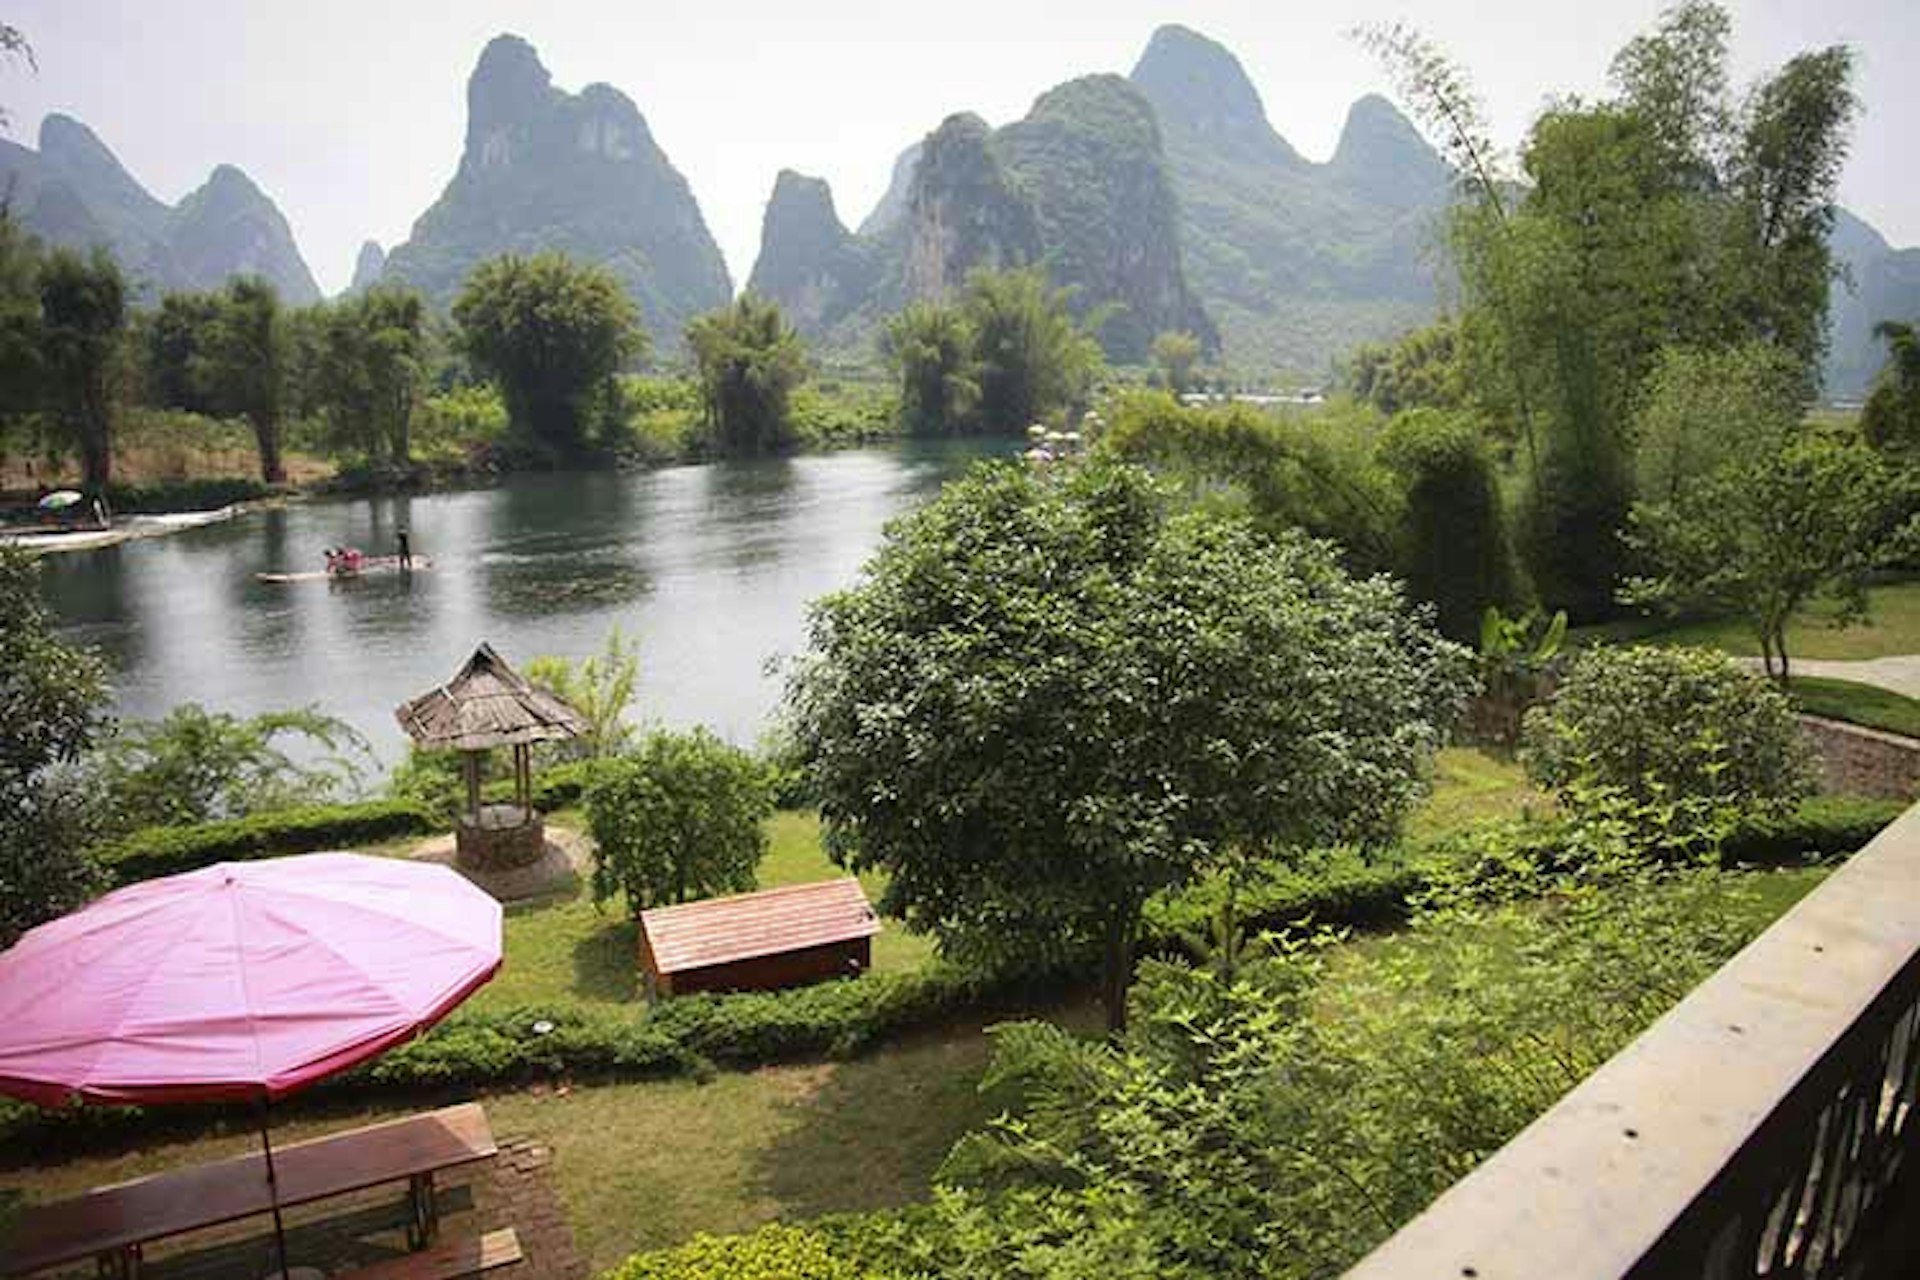 Scenes along the Li River in Yangshuo. Image by Anna Willett / Lonely Planet